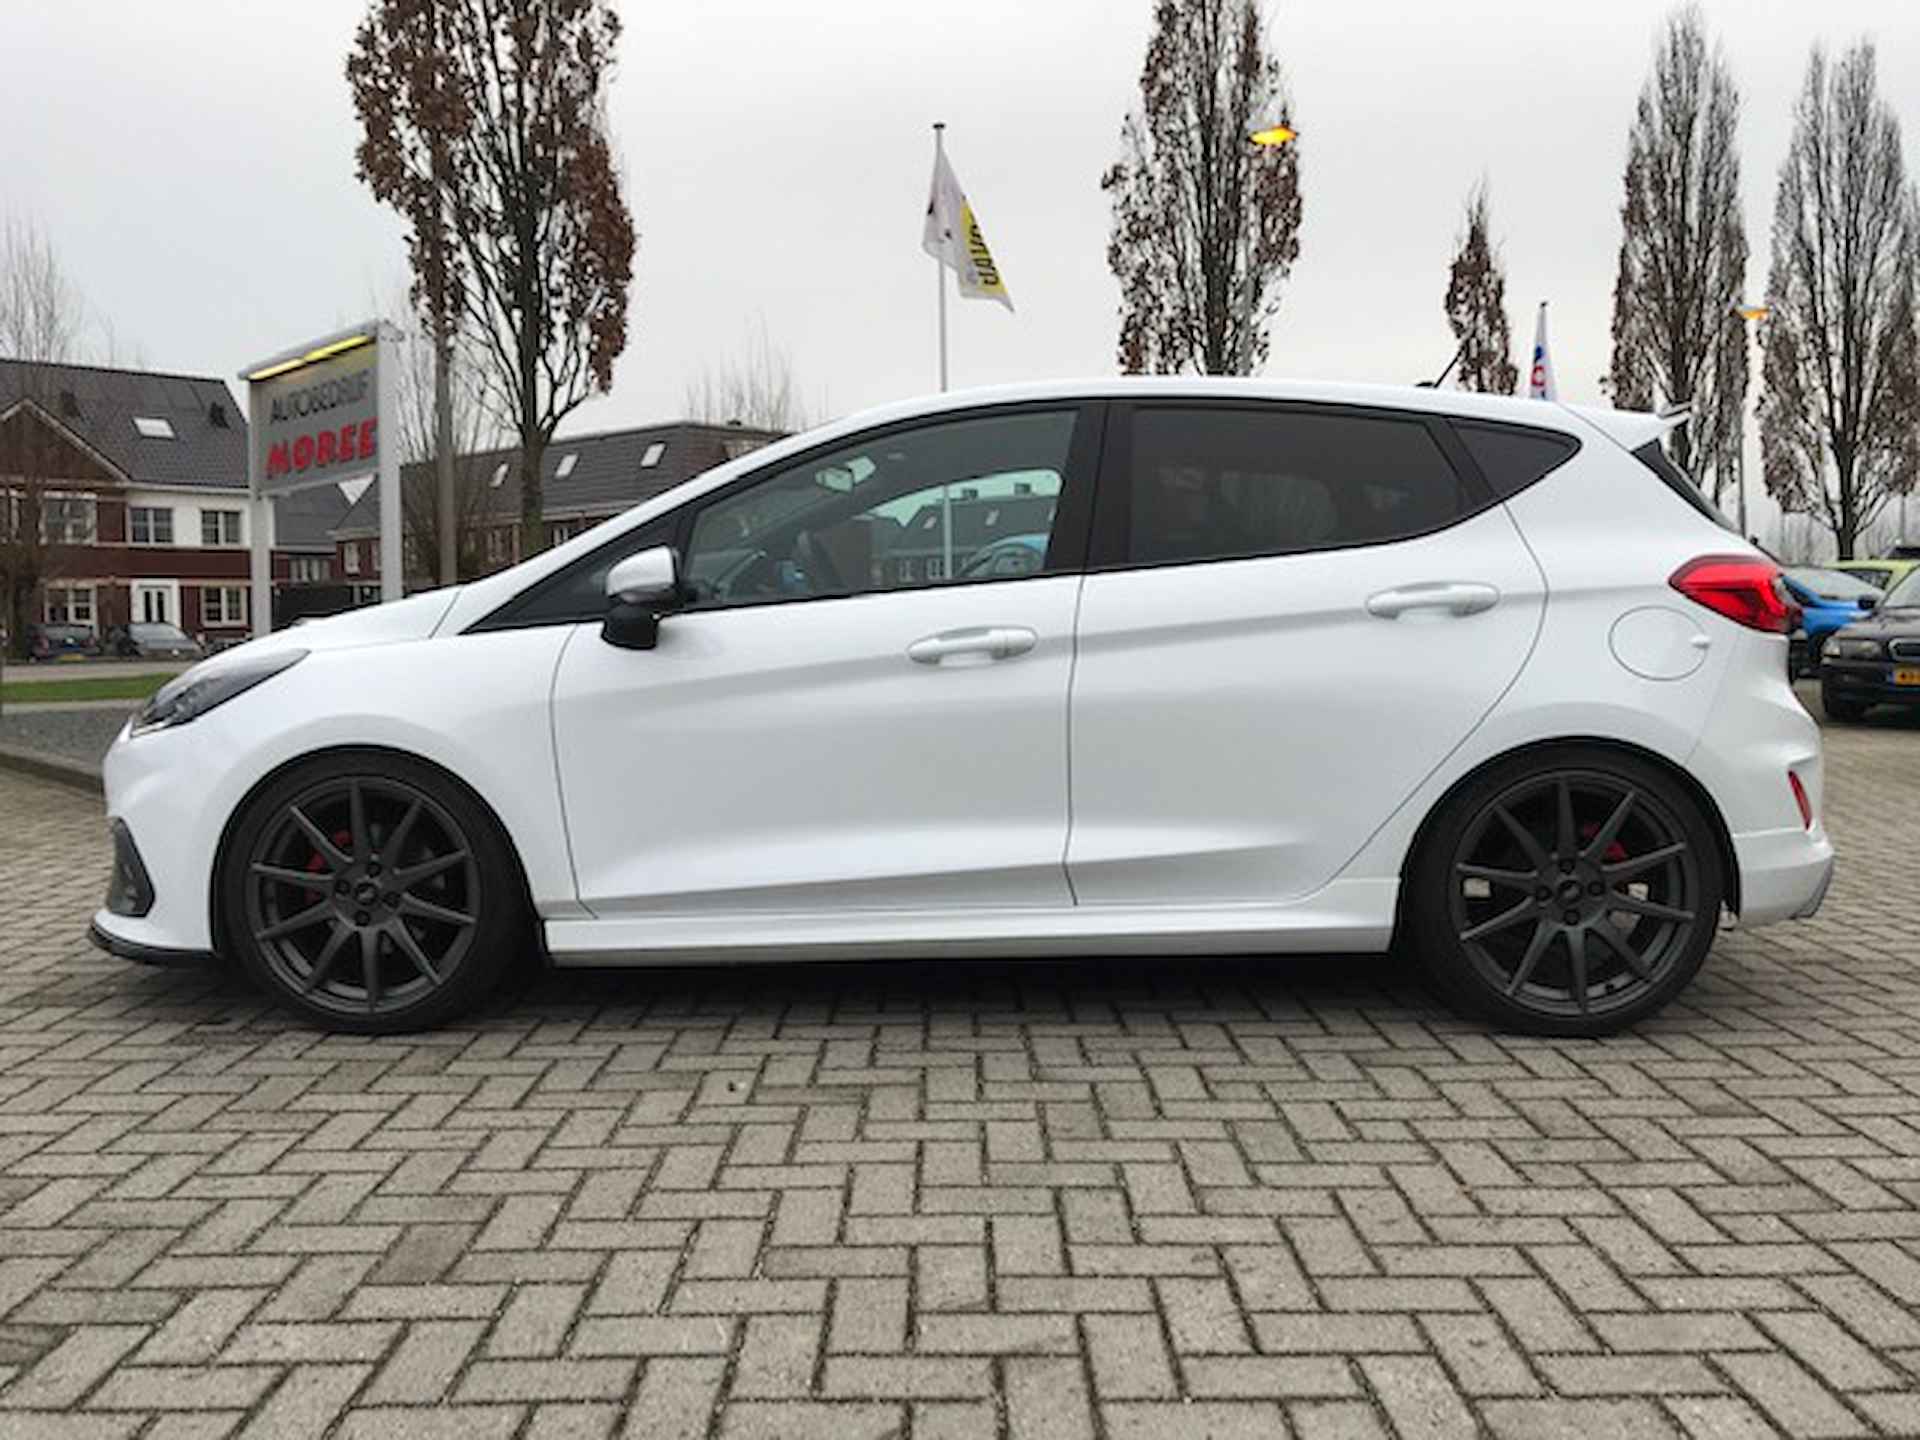 Ford Fiesta 1.5 EcoBoost ST-3 Mountune 235 PK Performance - 4/11